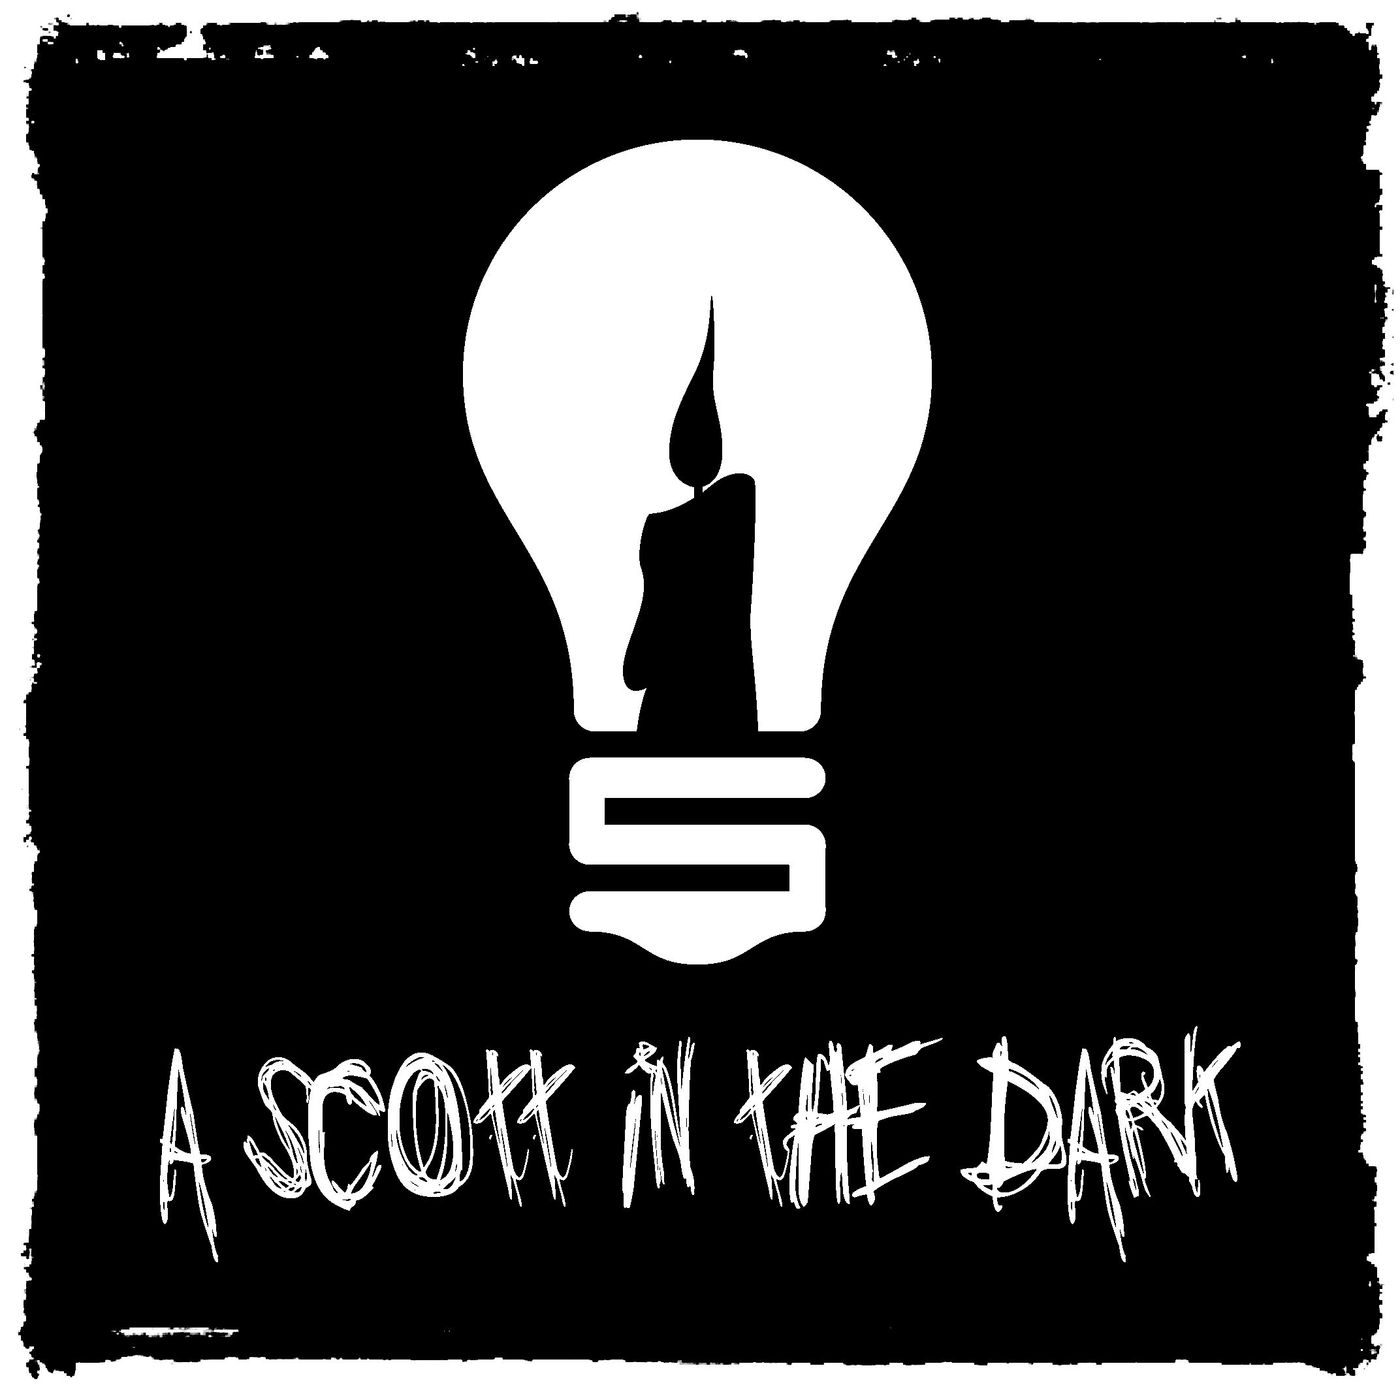 [A Scott in the Dark] Episode 21: Two Shows in Long Beach